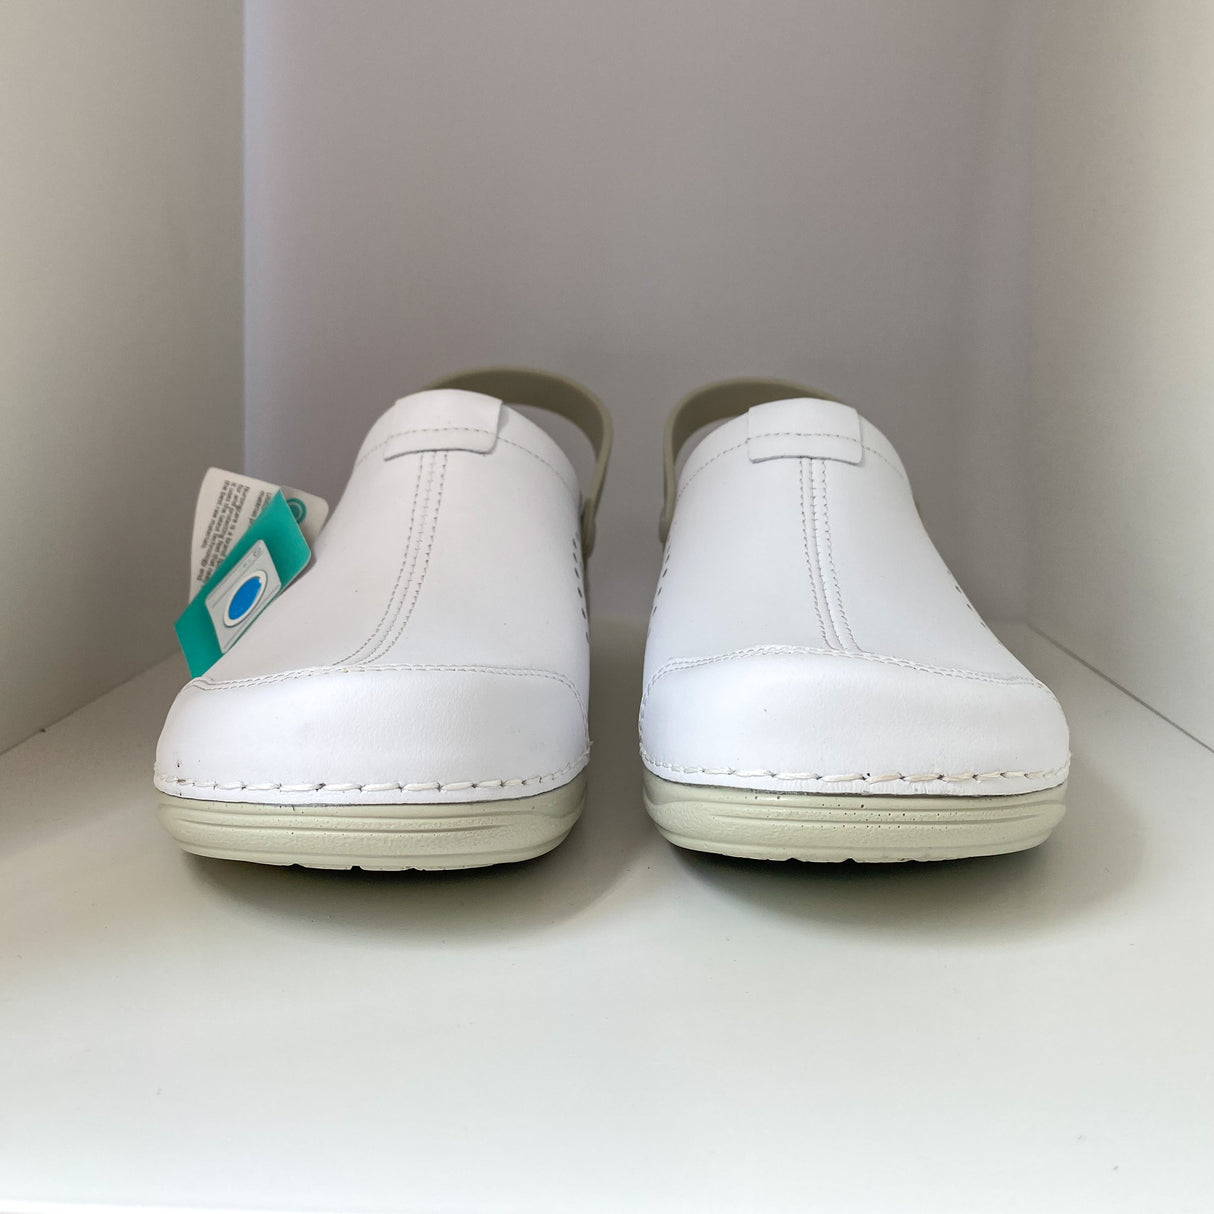 Comfort shoes for work | WHITE | Venice